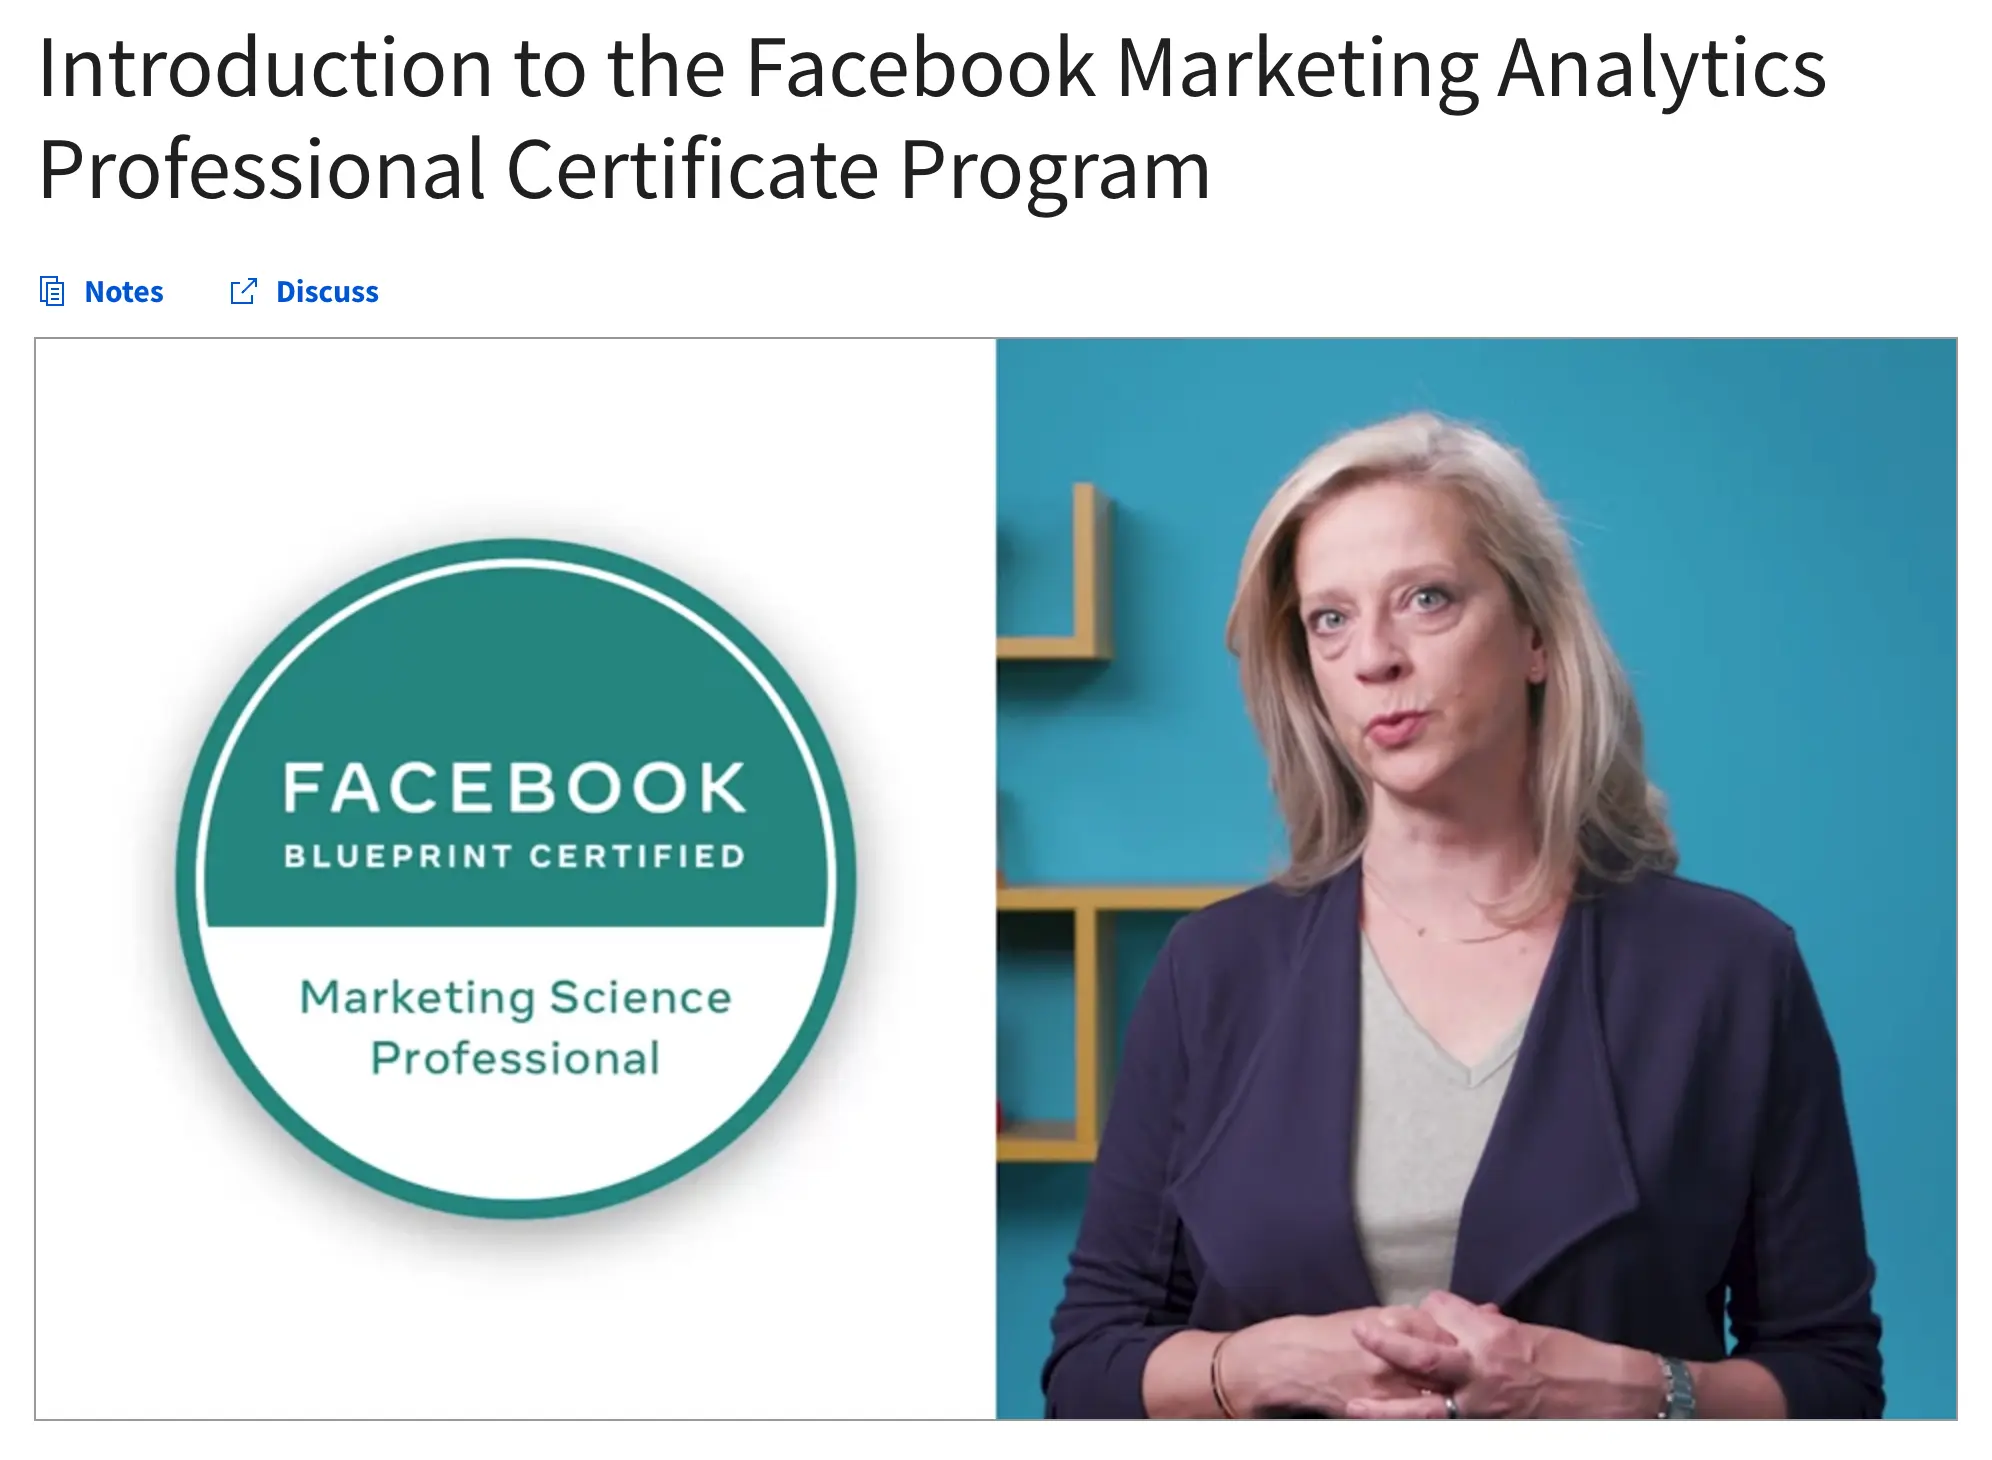 Is a marketing analytics certificate worth it?